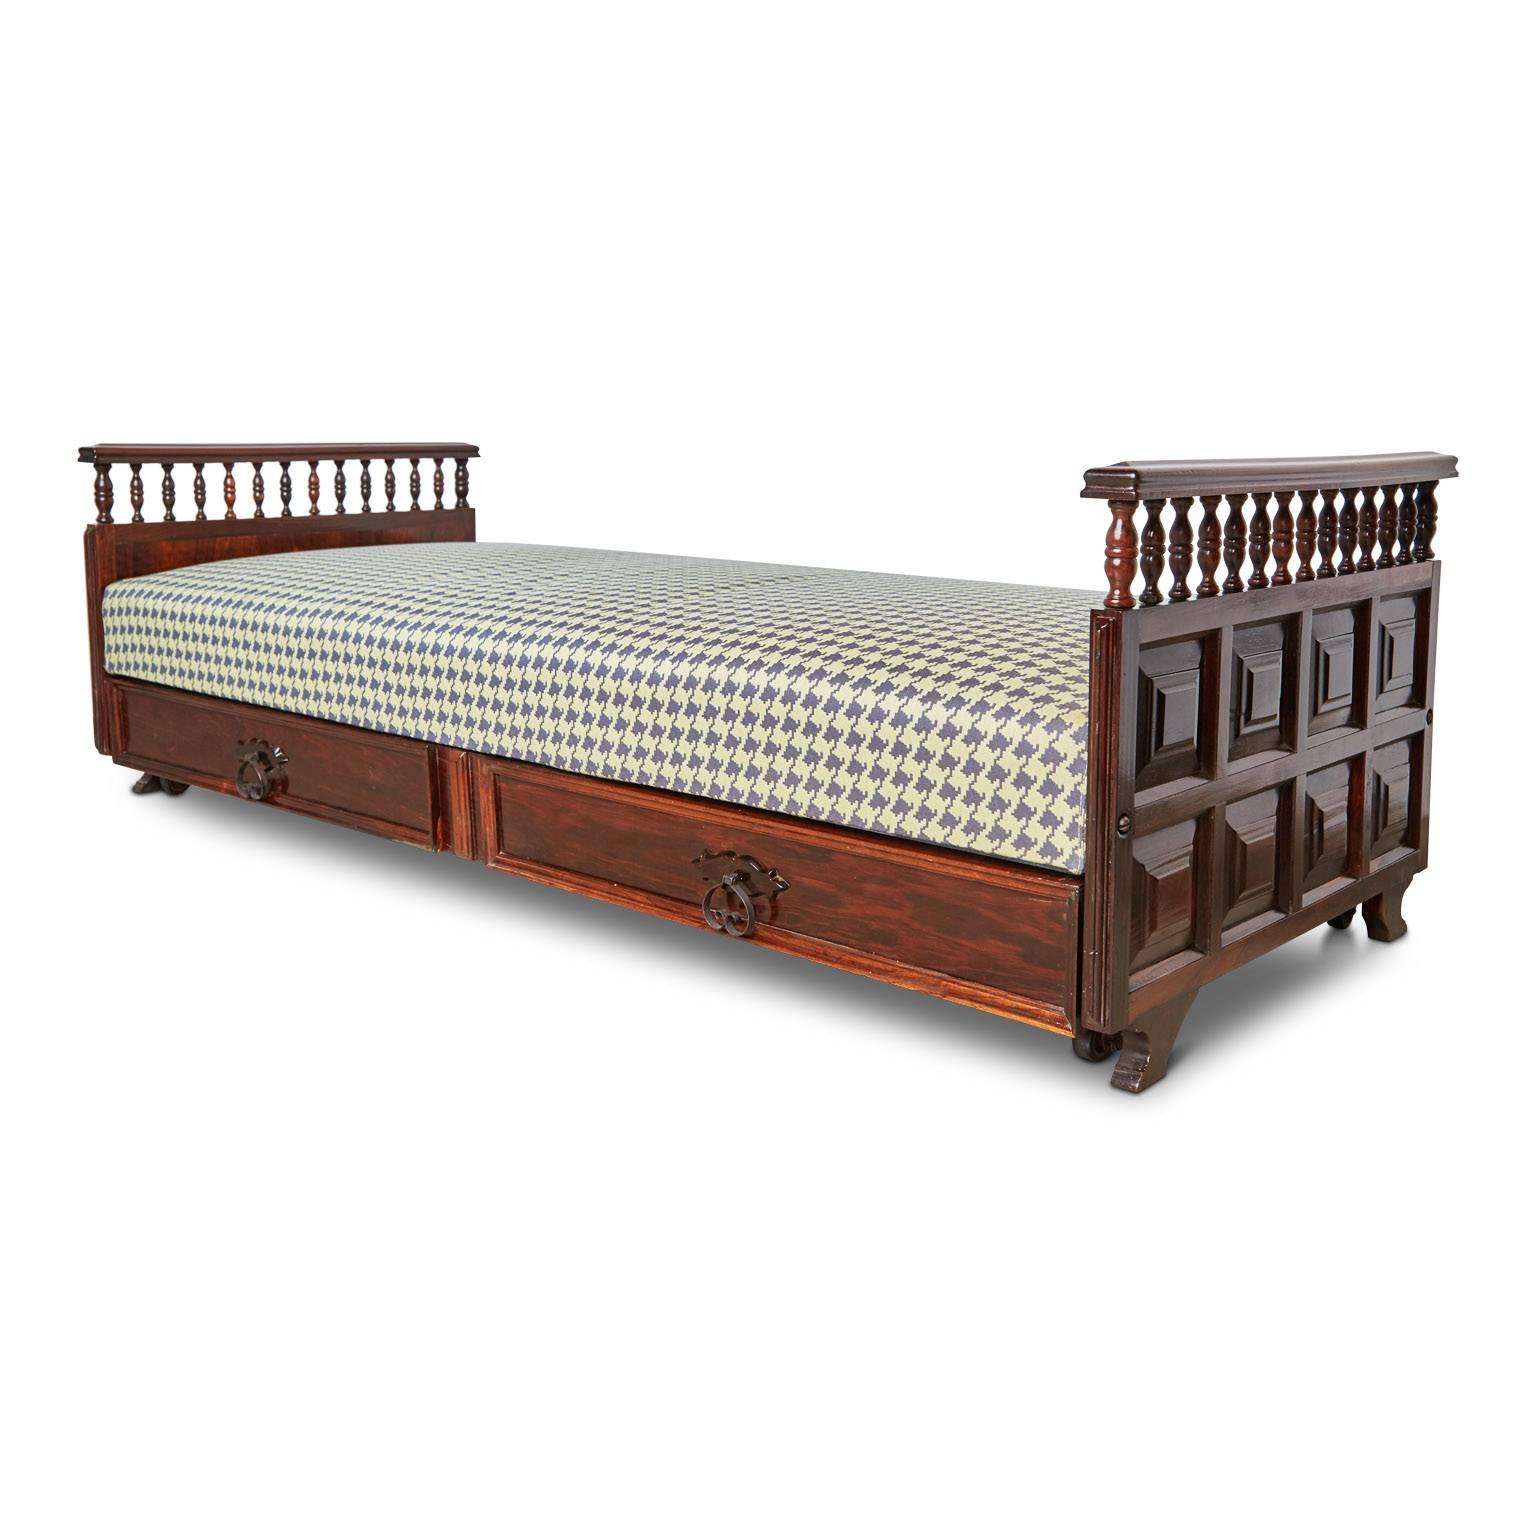 Fabricated from solid Rosewood, this newly restored substantial daybed features a pull-out storage compartment or add a mattress to create a trundle bed underneath the daybed frame for additional guests. 

Each end the frame has been carved with